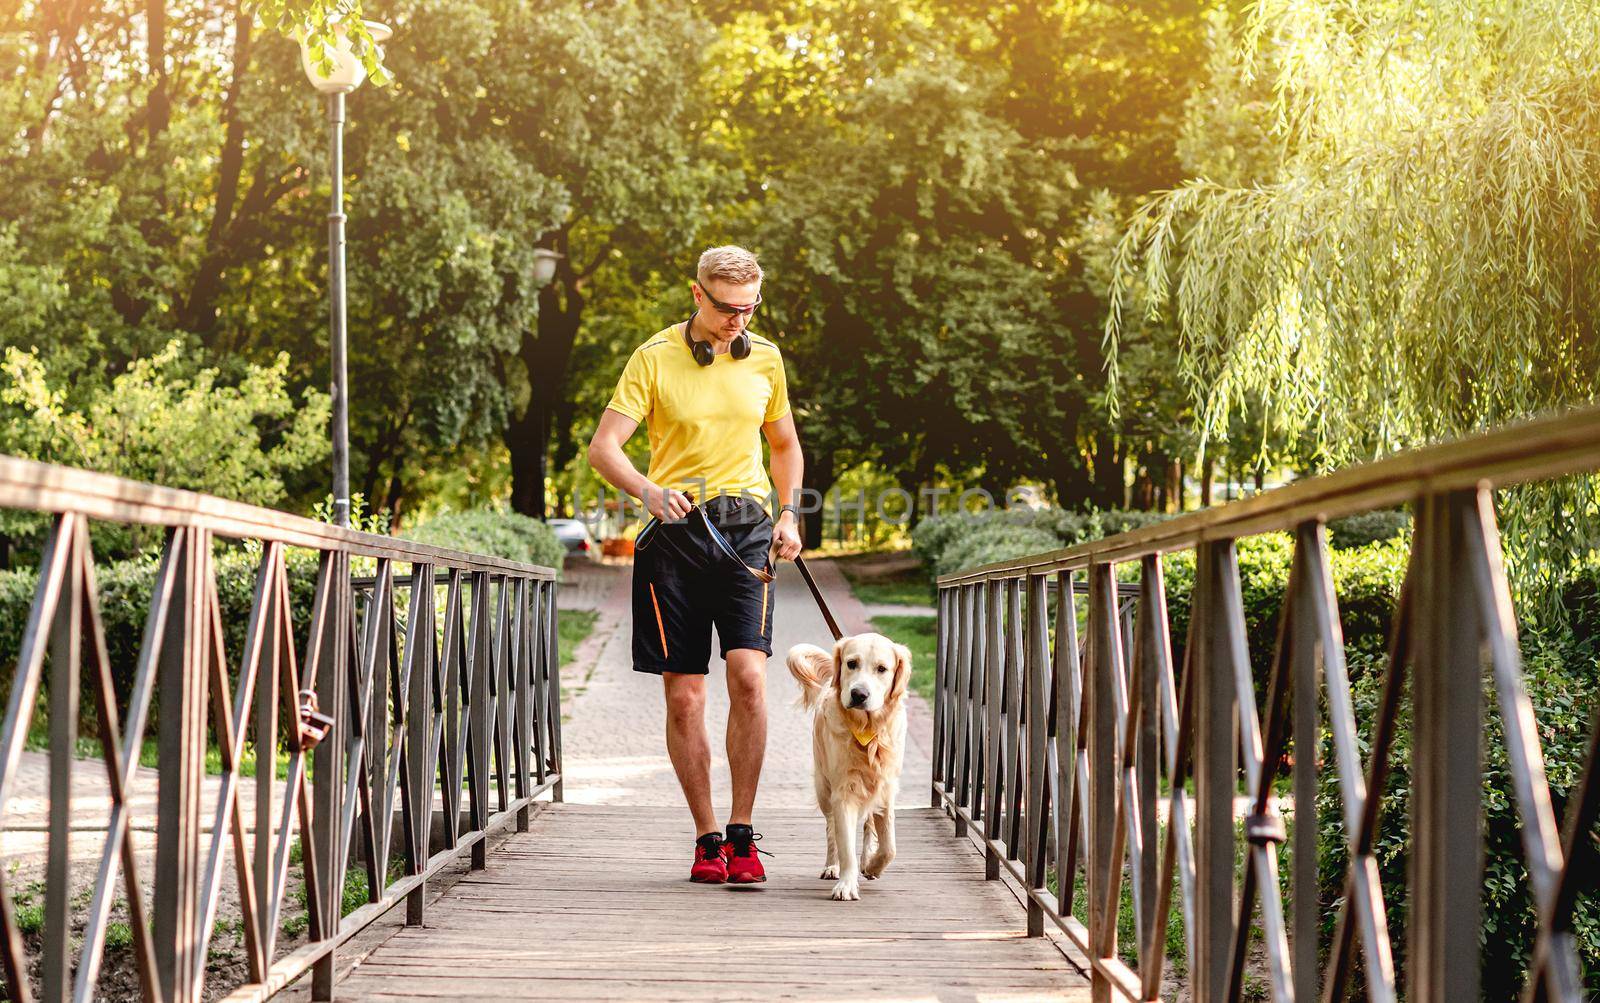 Man jogging in park with dog by tan4ikk1